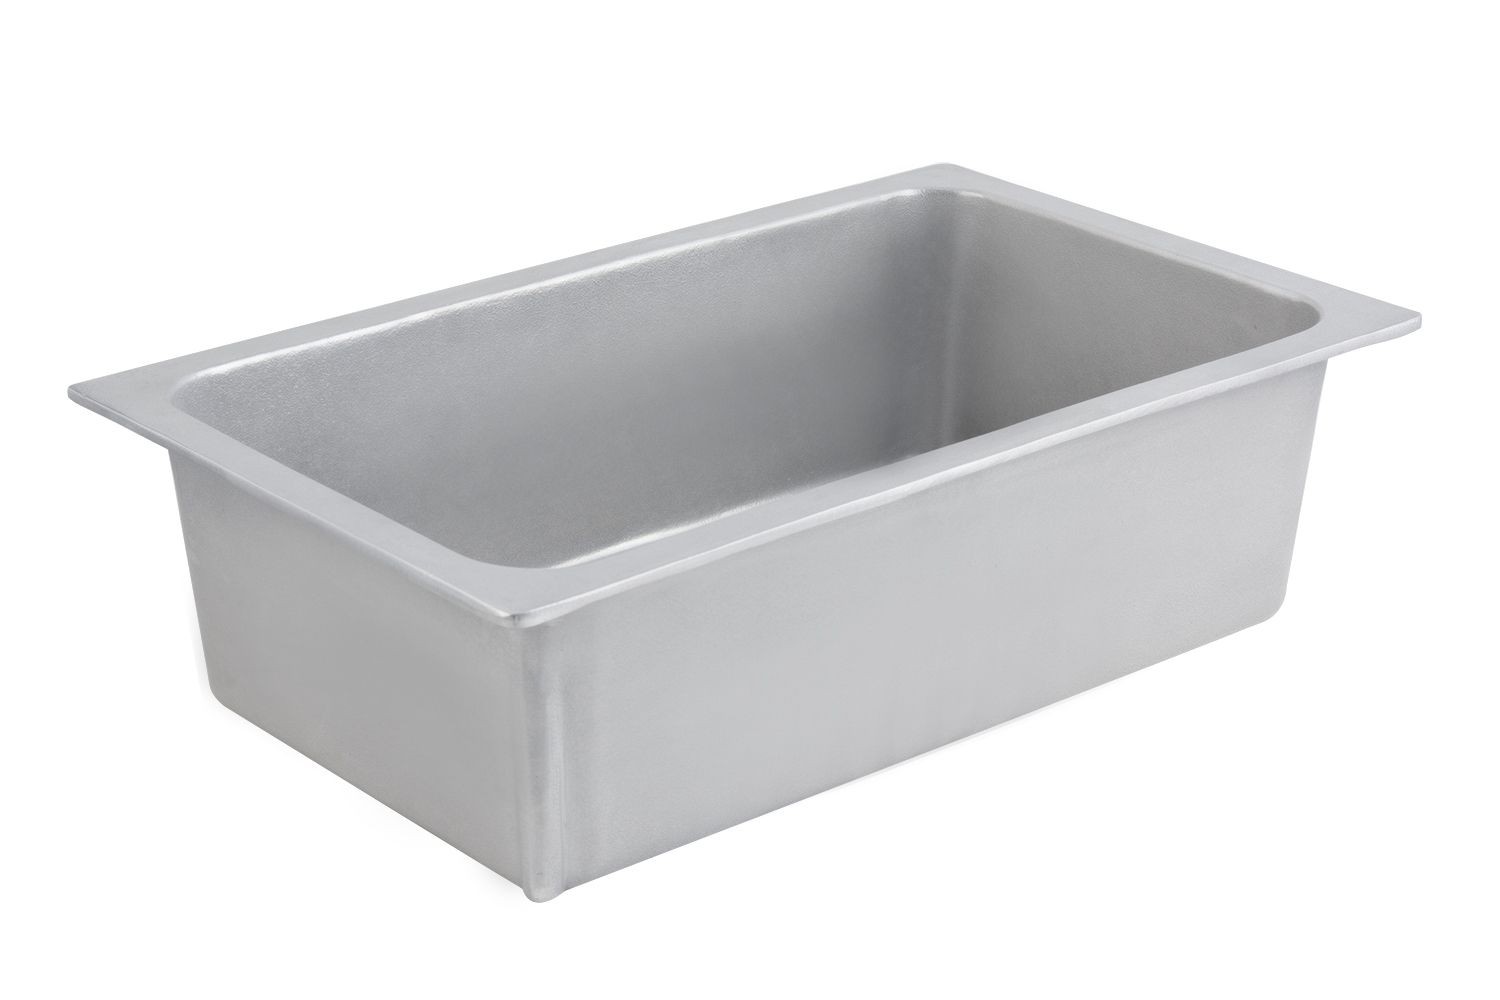 Bon Chef 5072P Full-Size Chafer Food Pan, Pewter Glo 6" Deep